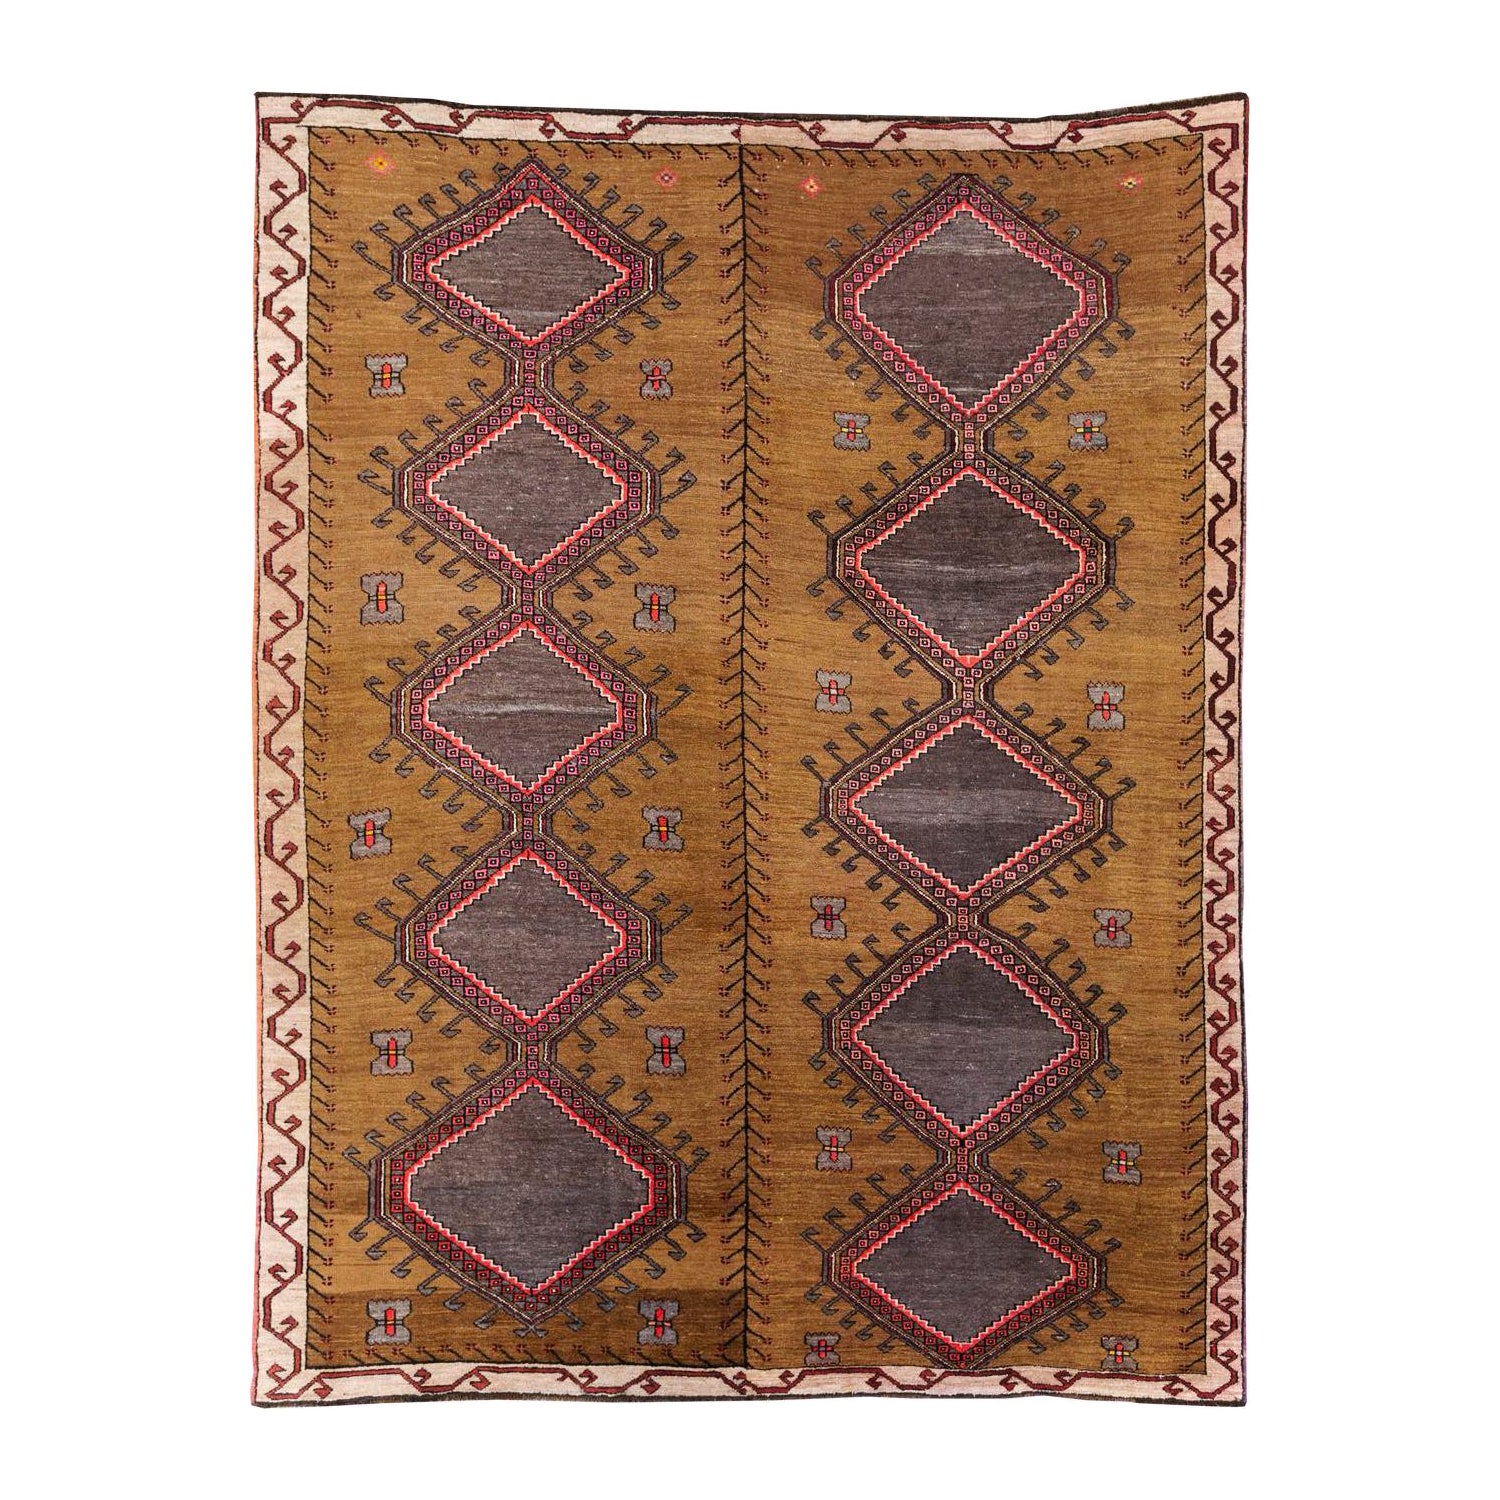 Galerie Shabab Collection Mid-20th Century Turkish Tribal Room Size Carpet For Sale